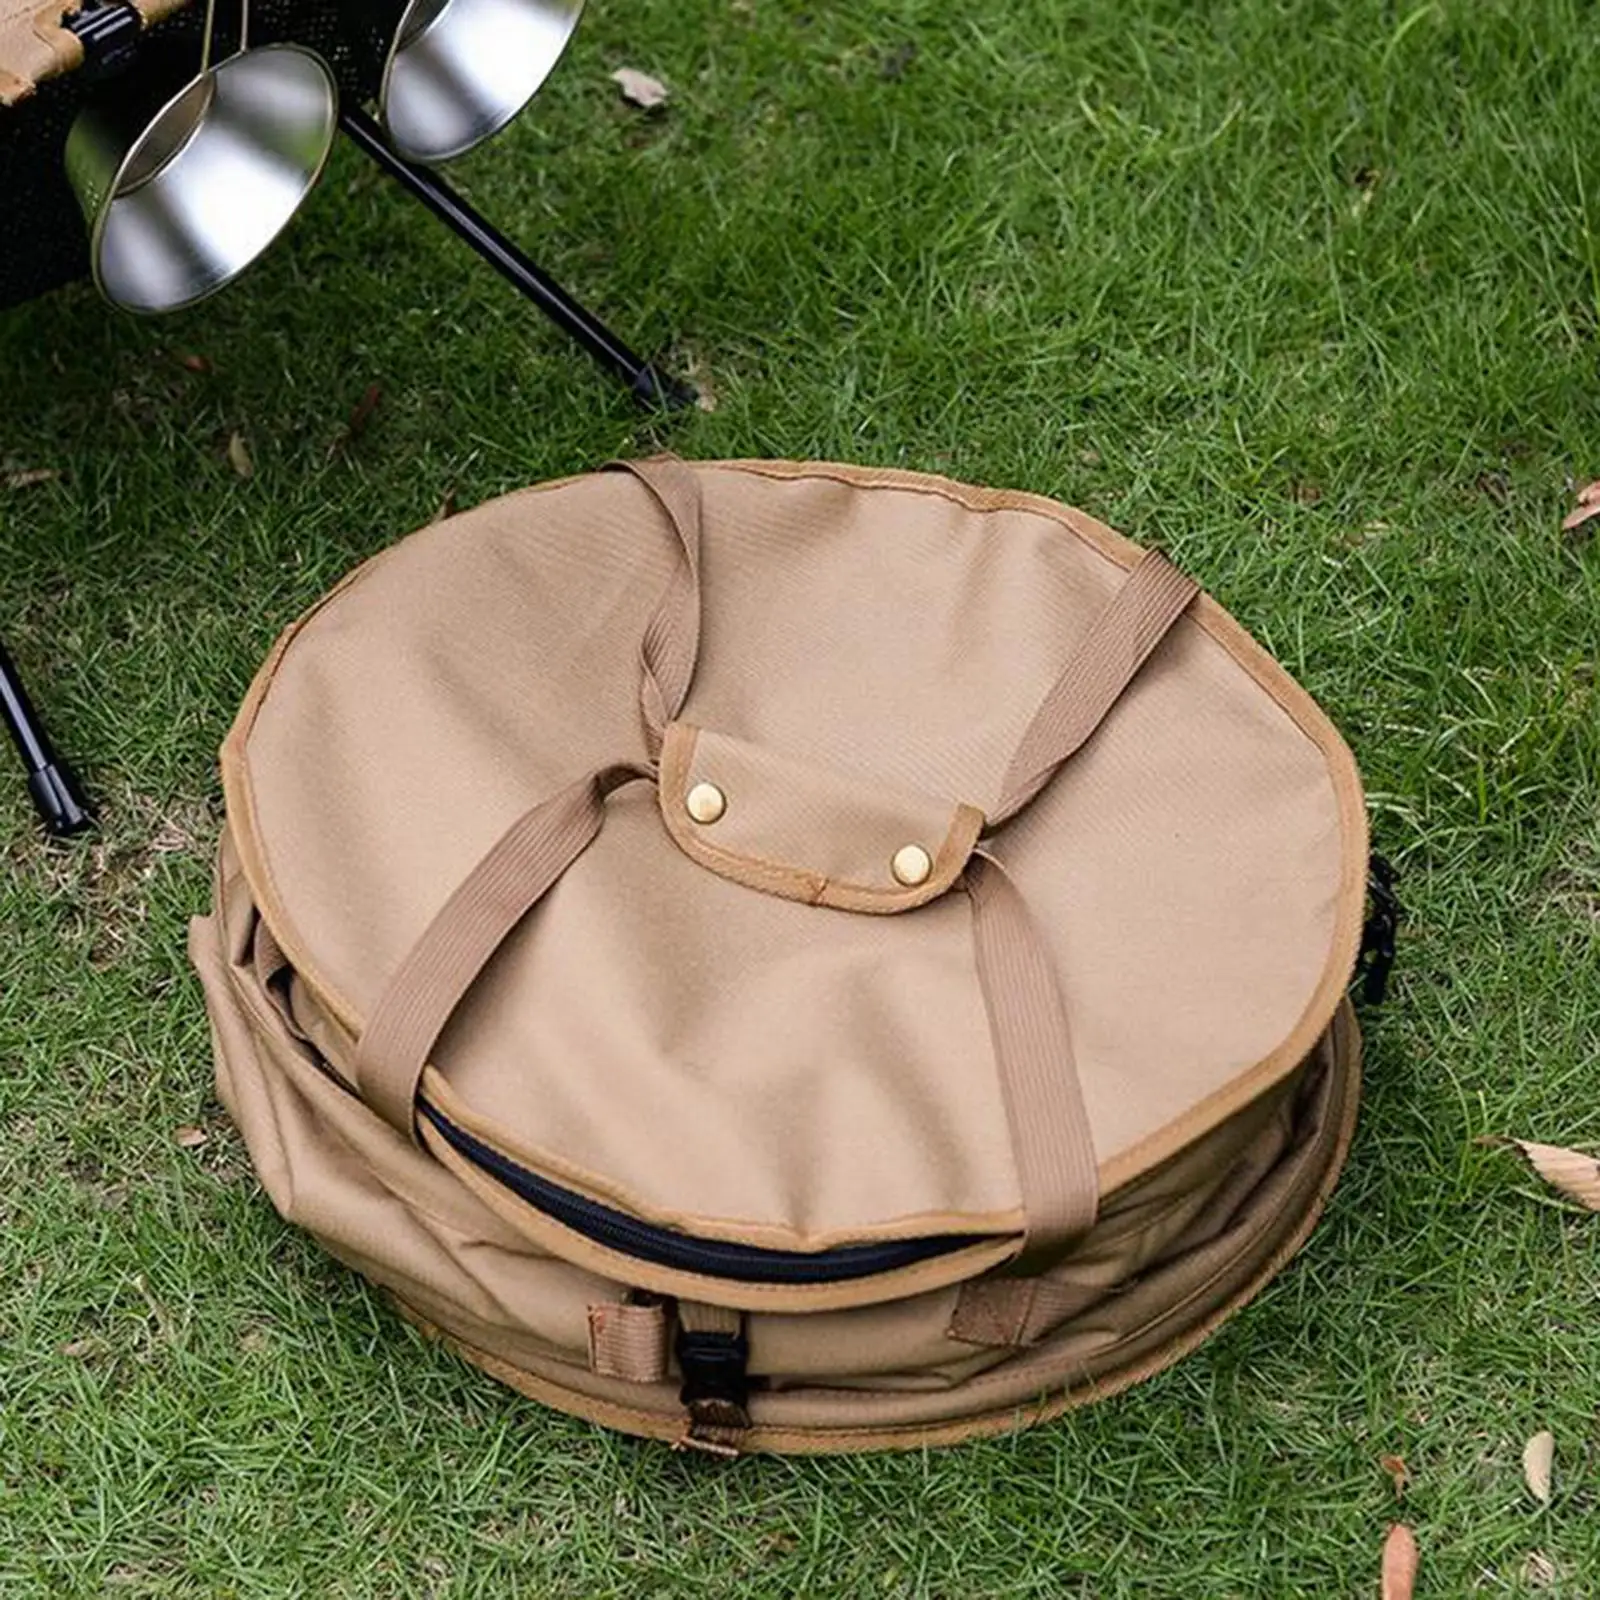 Waterproof BBQ Tableware Carry Bag with Separator Tote Grill Tool Carry Bag Barbecue Tool Storage Bag for Grill Camping